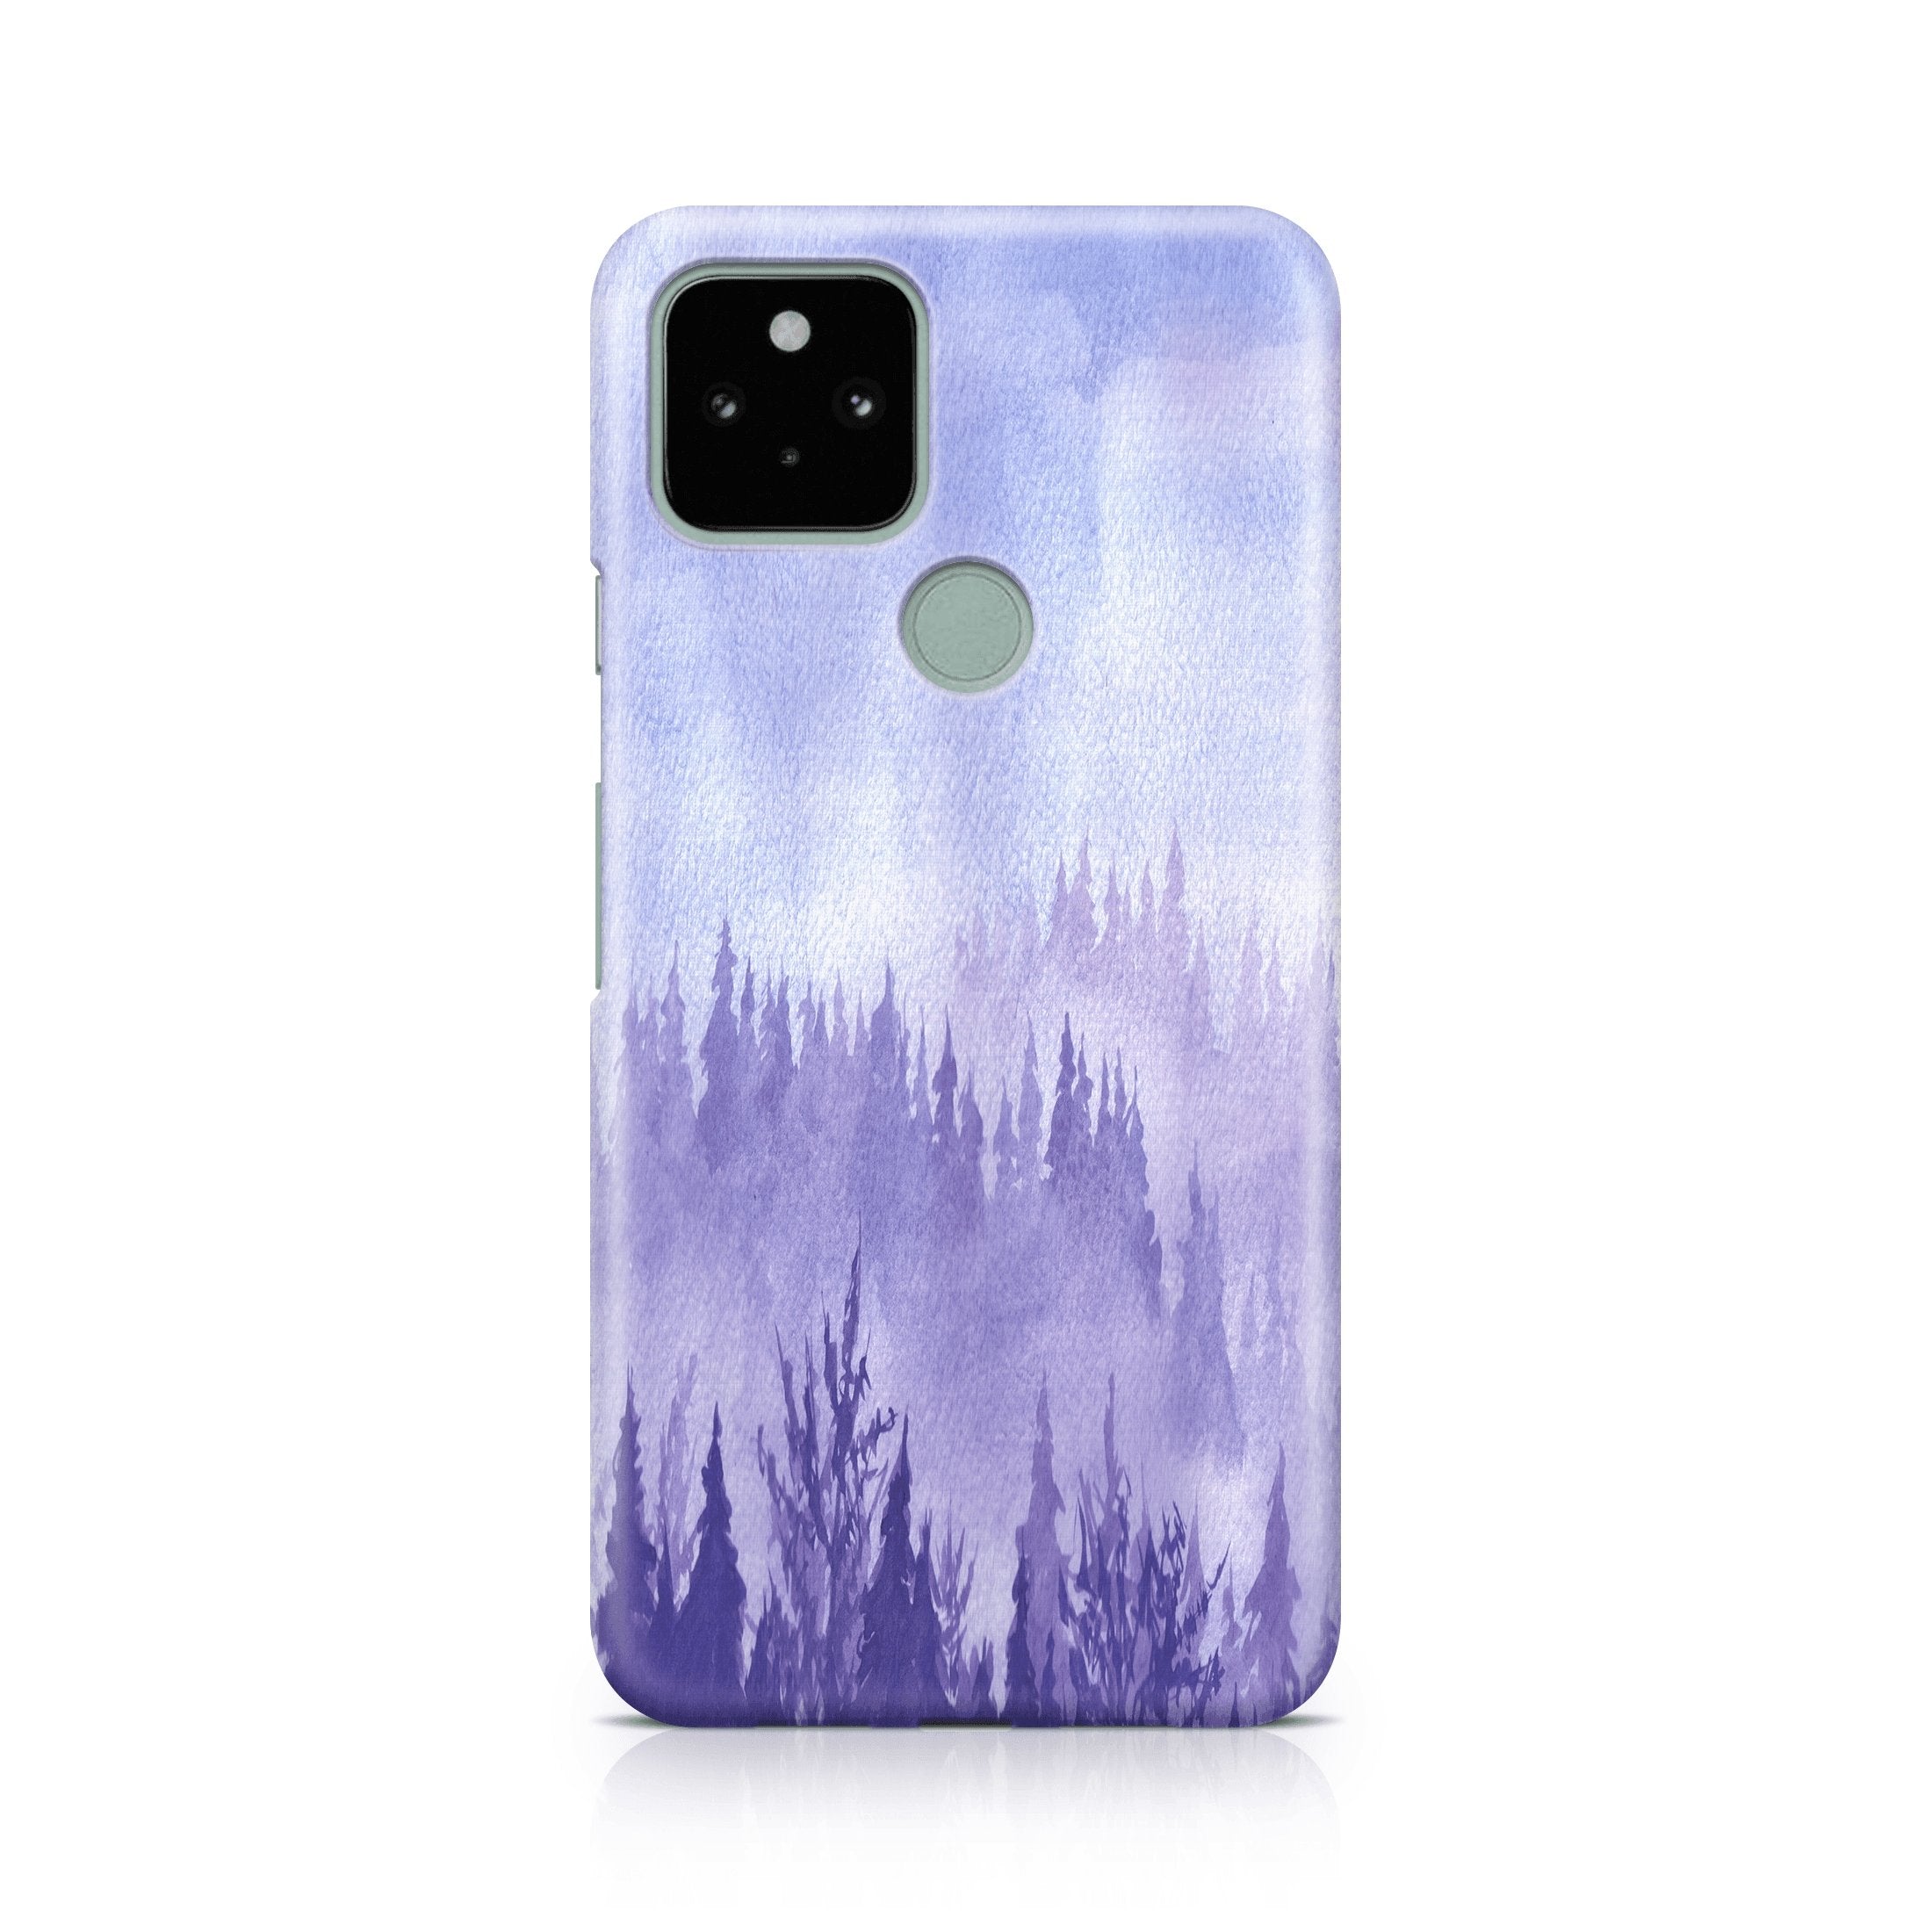 Purple Hills - Google phone case designs by CaseSwagger